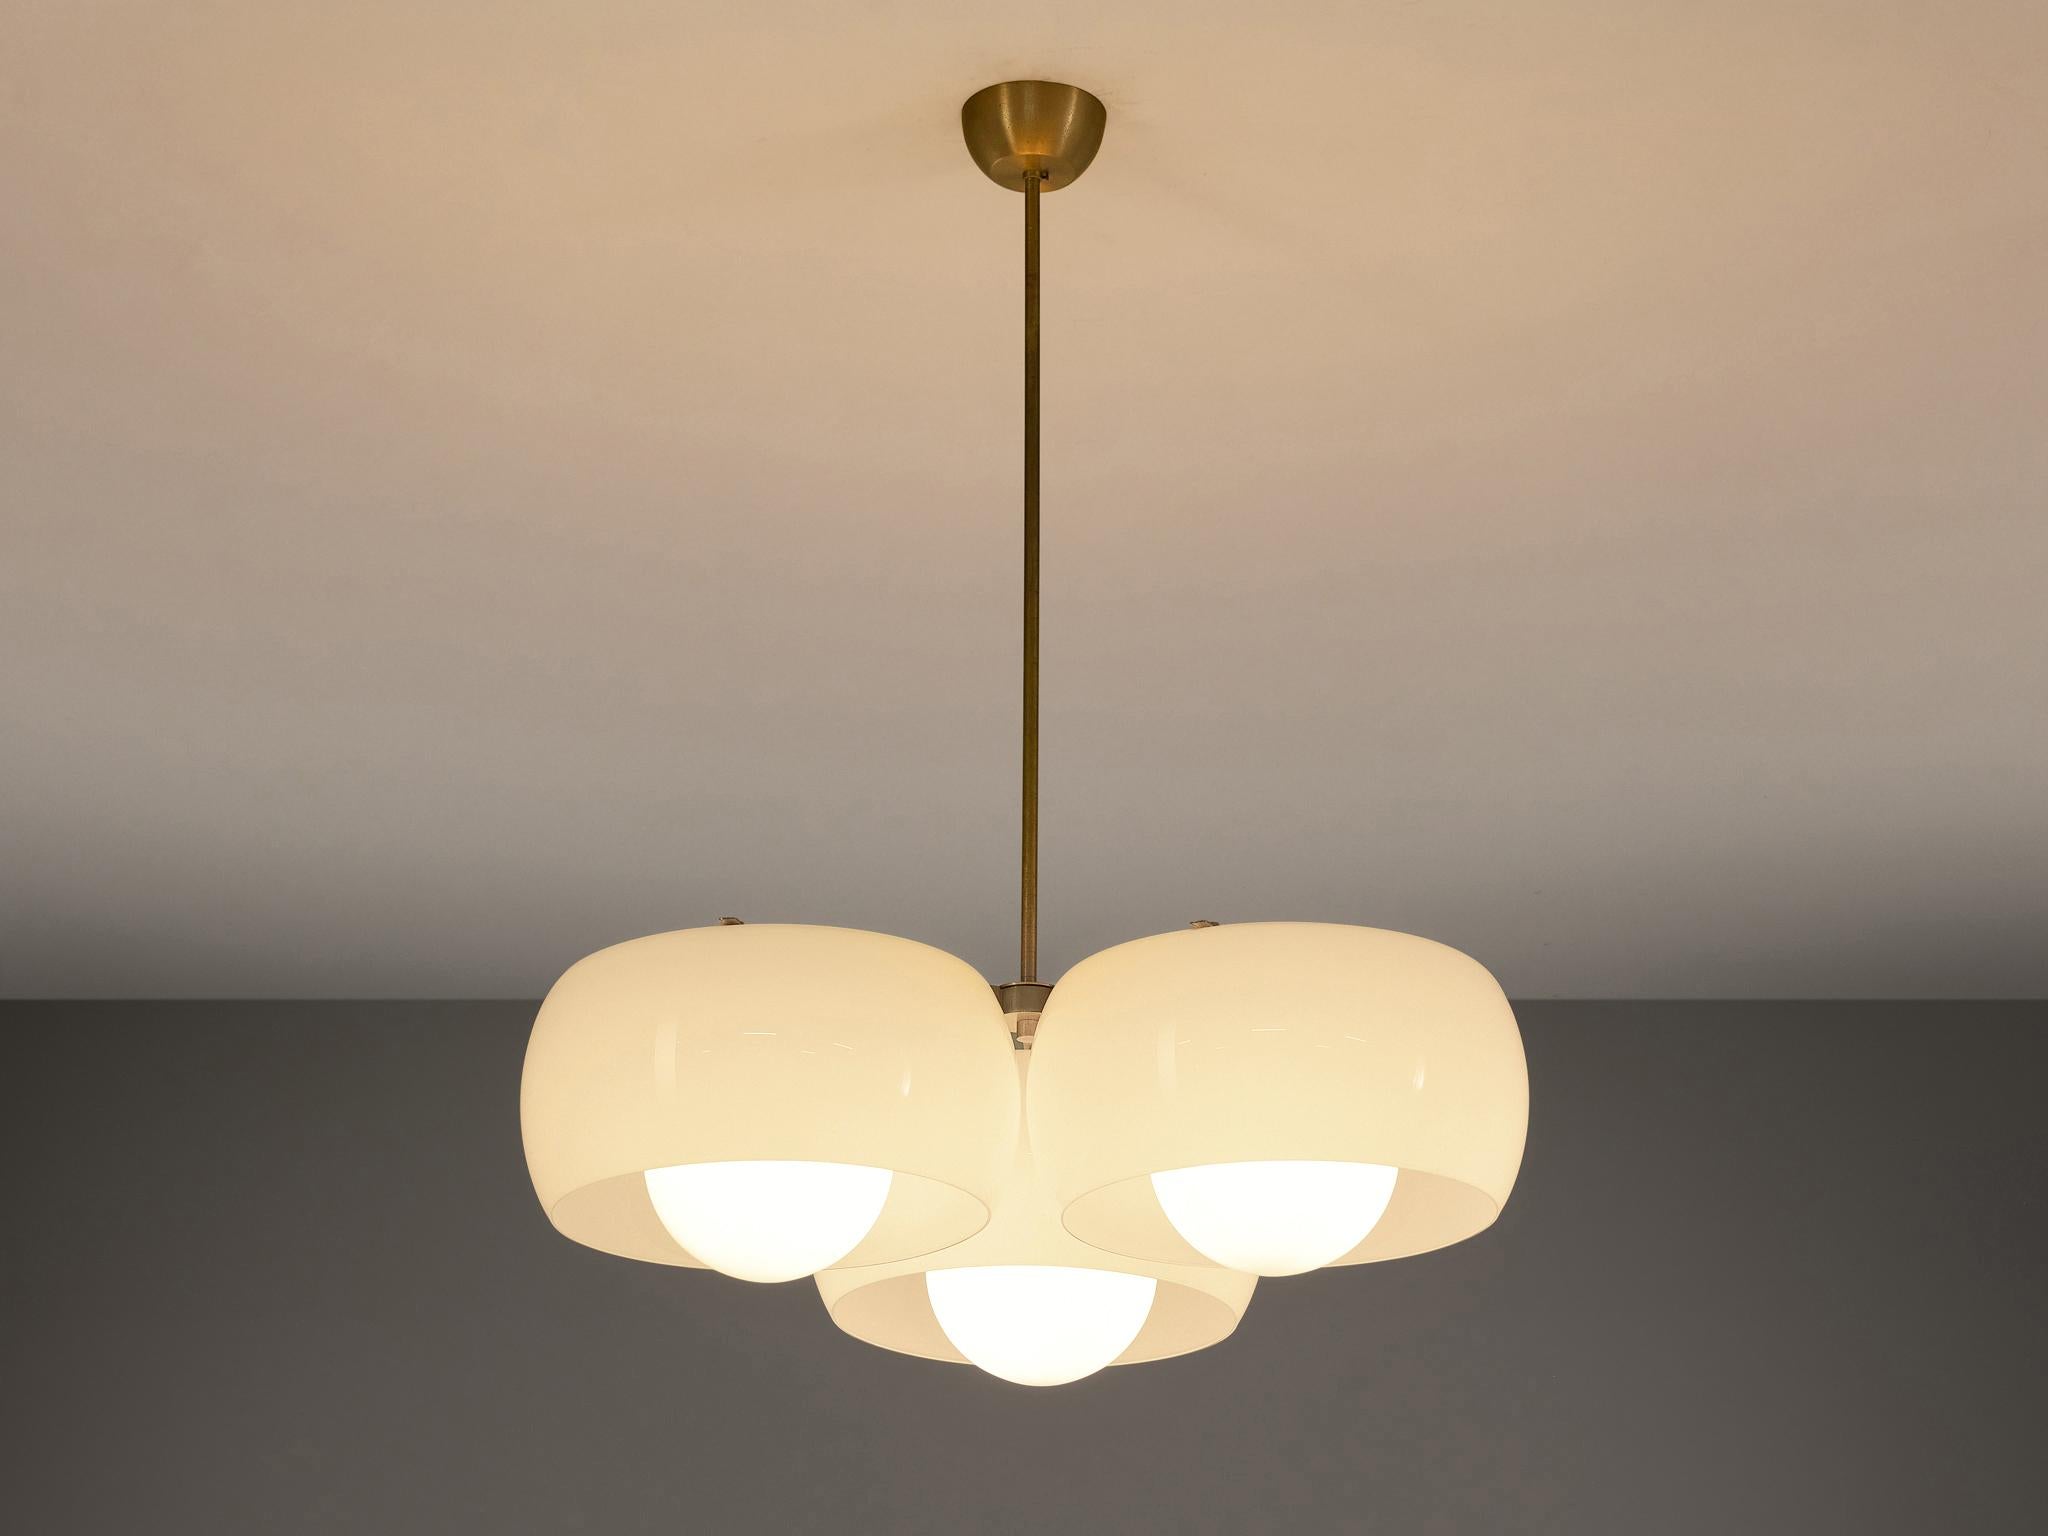 Vico Magistretti for Artemide, chandeliers model 'Triclinio', matt nickel-plated brass, opaline glass, Italy, design 1967

This charming chandelier features three intricate shades in opaline glass, hence the name ‘tri’. This version is part of the